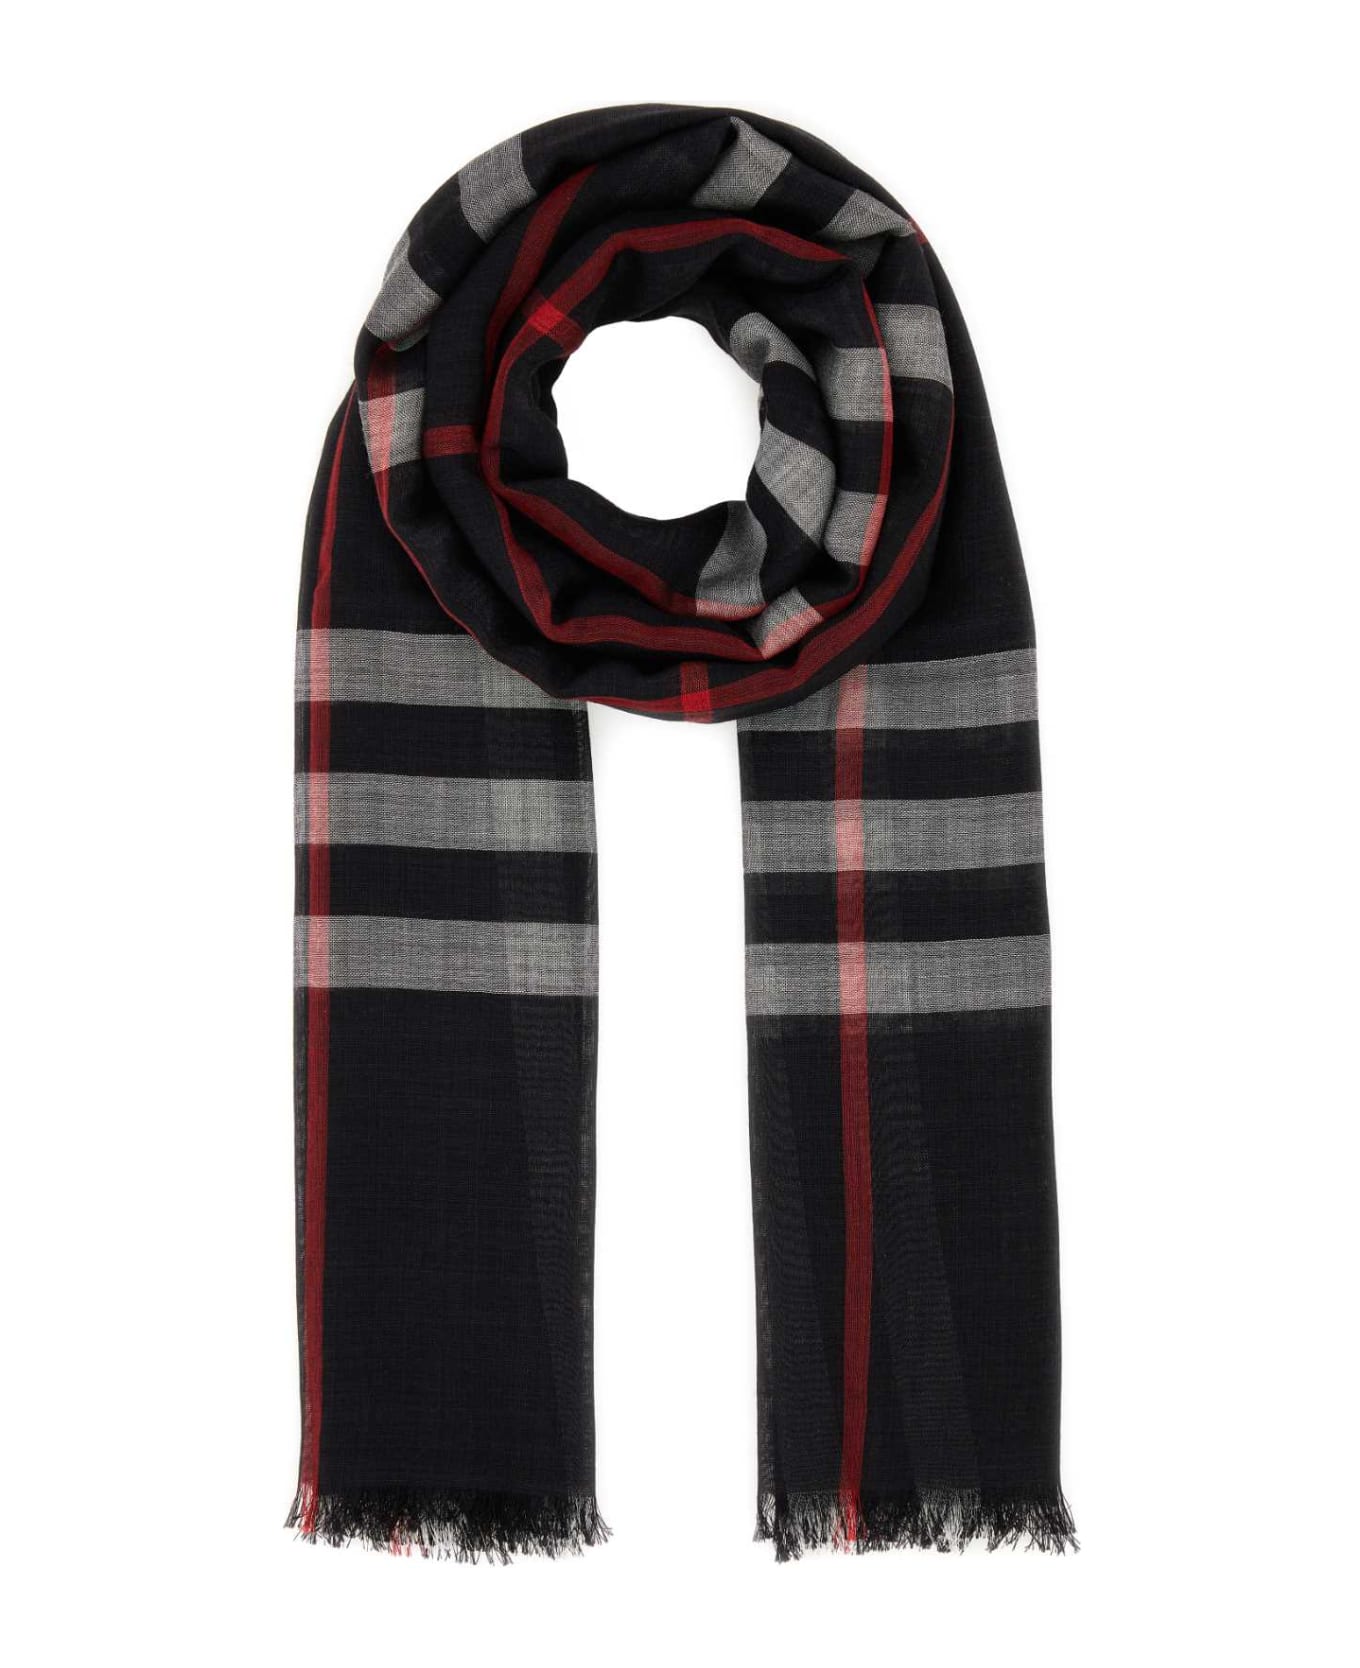 Burberry Embroidered Wool Blend Scarf - NAVY